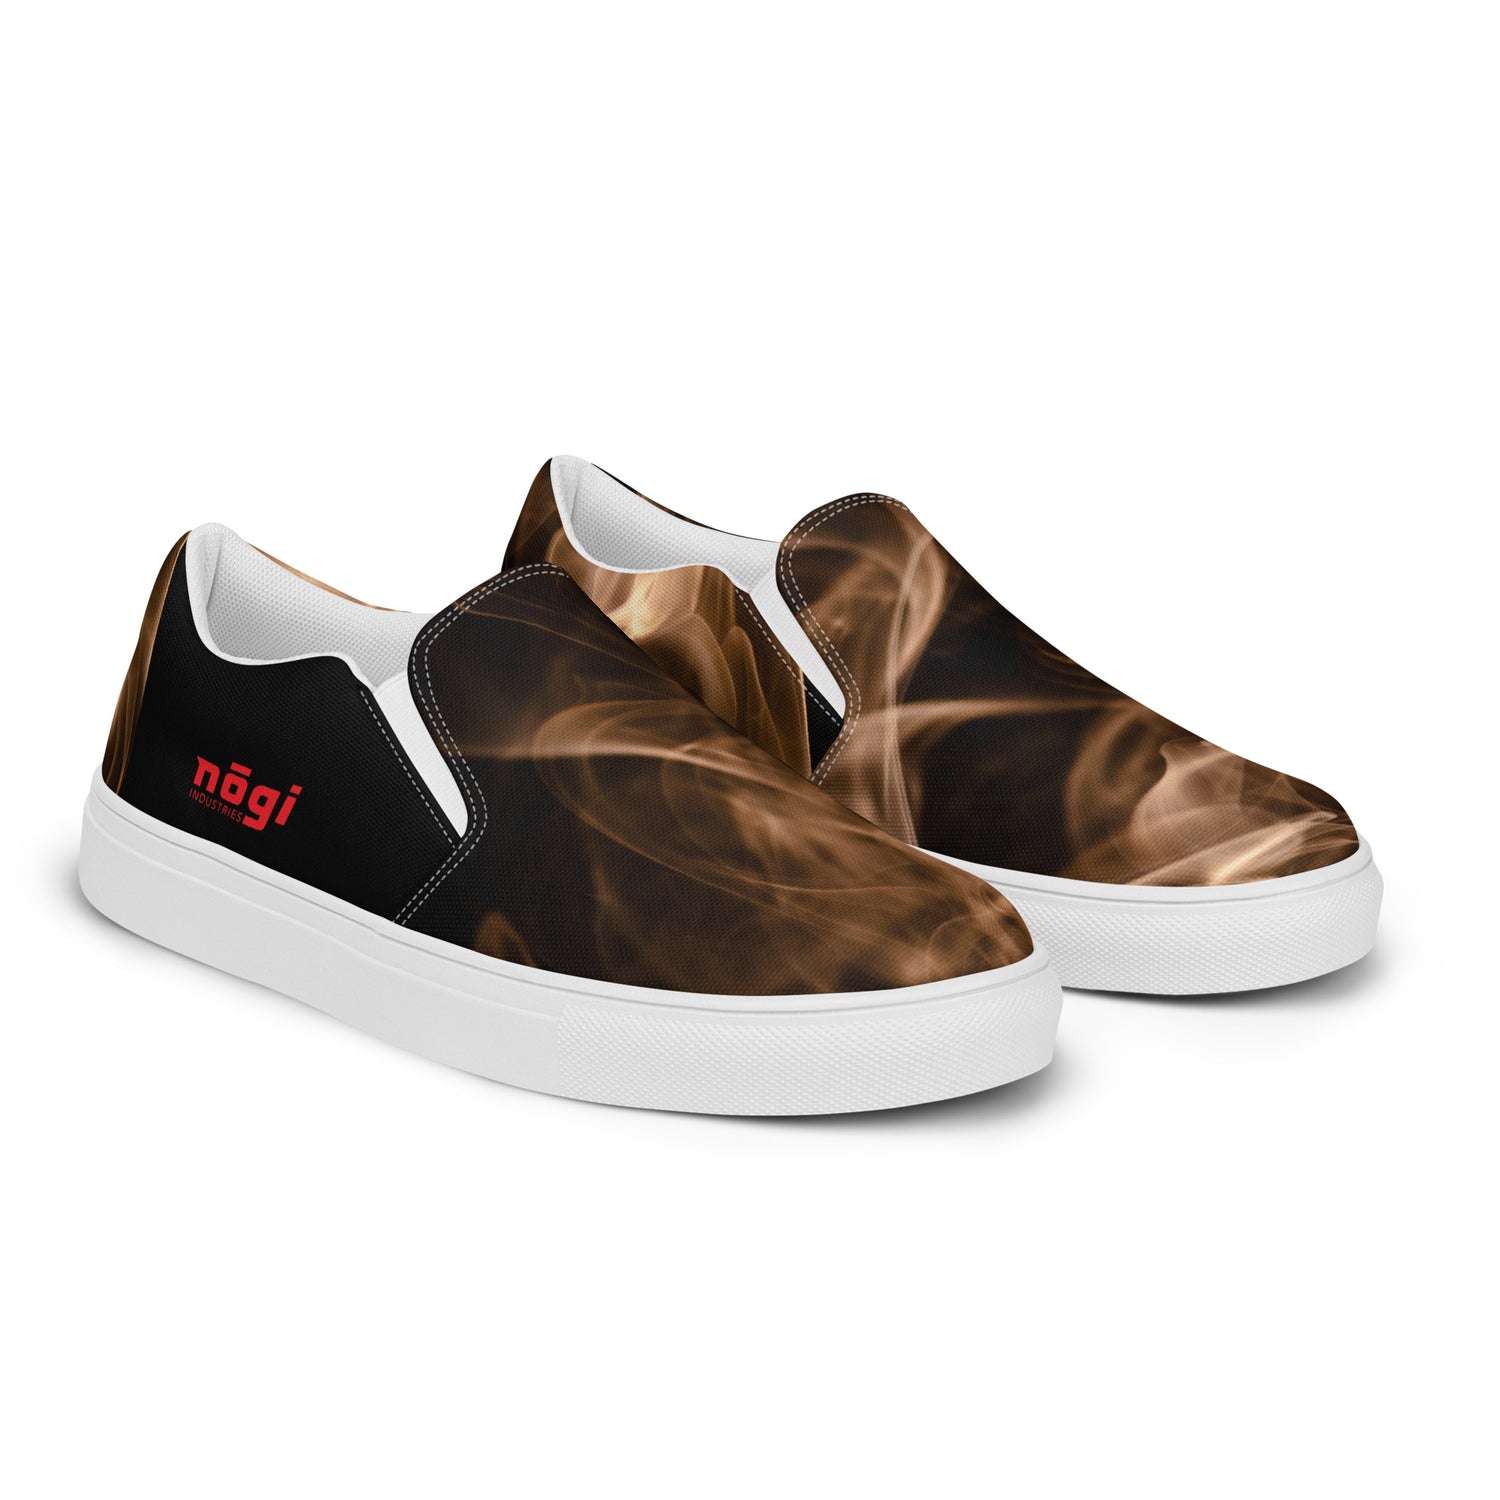 Brown Smoke Men’s Slip-on Canvas Shoes by Nogi Industries